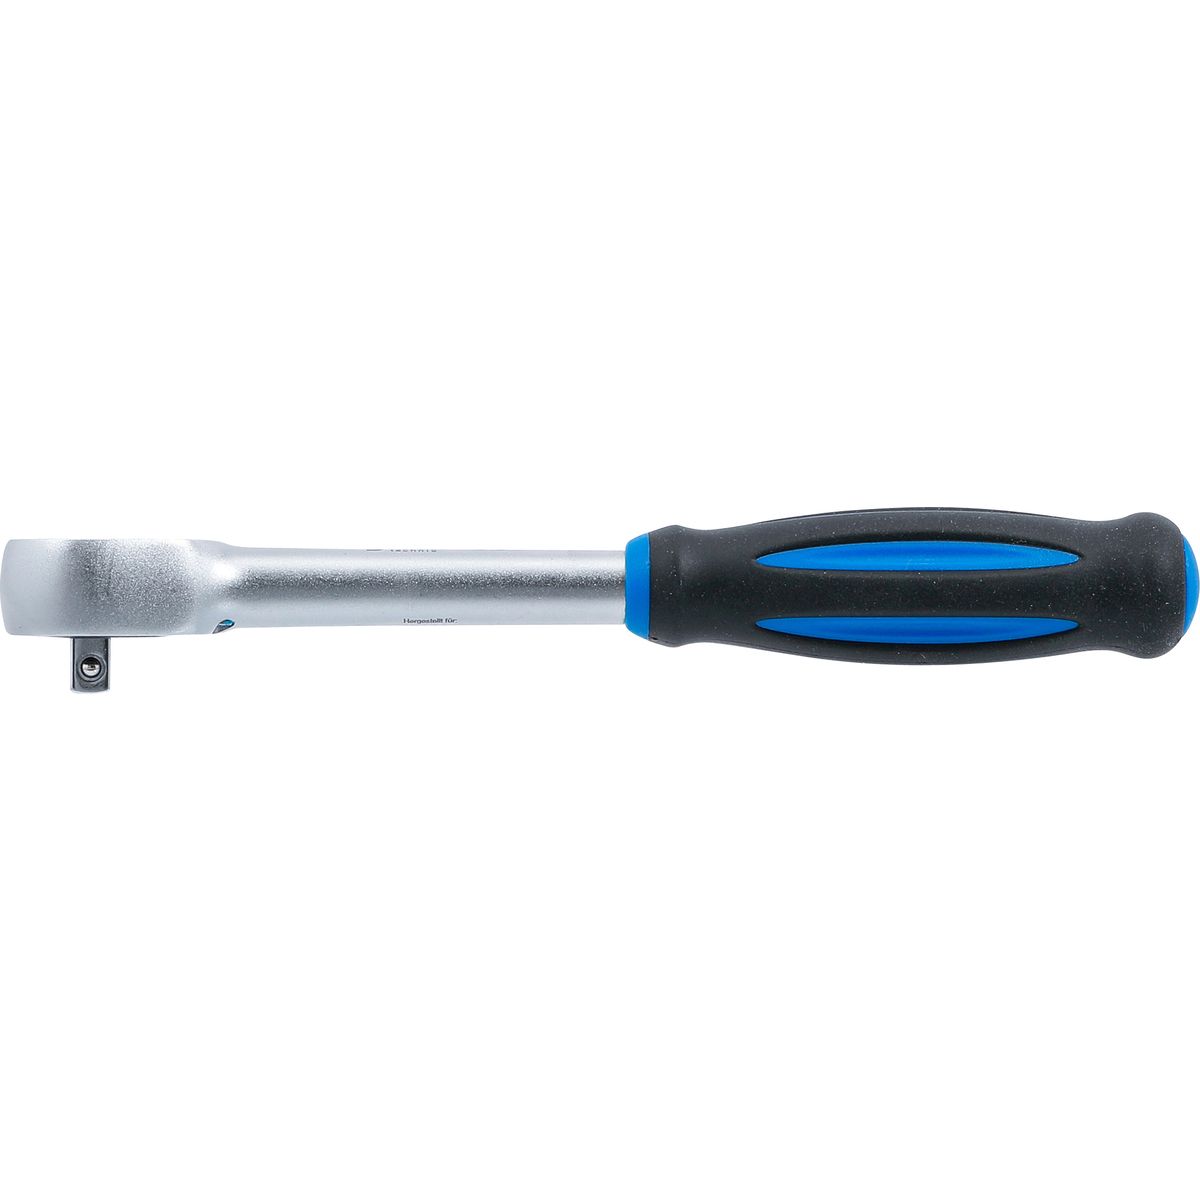 Reversible Ratchet with Spinner Handle | 6.3 mm (1/4")